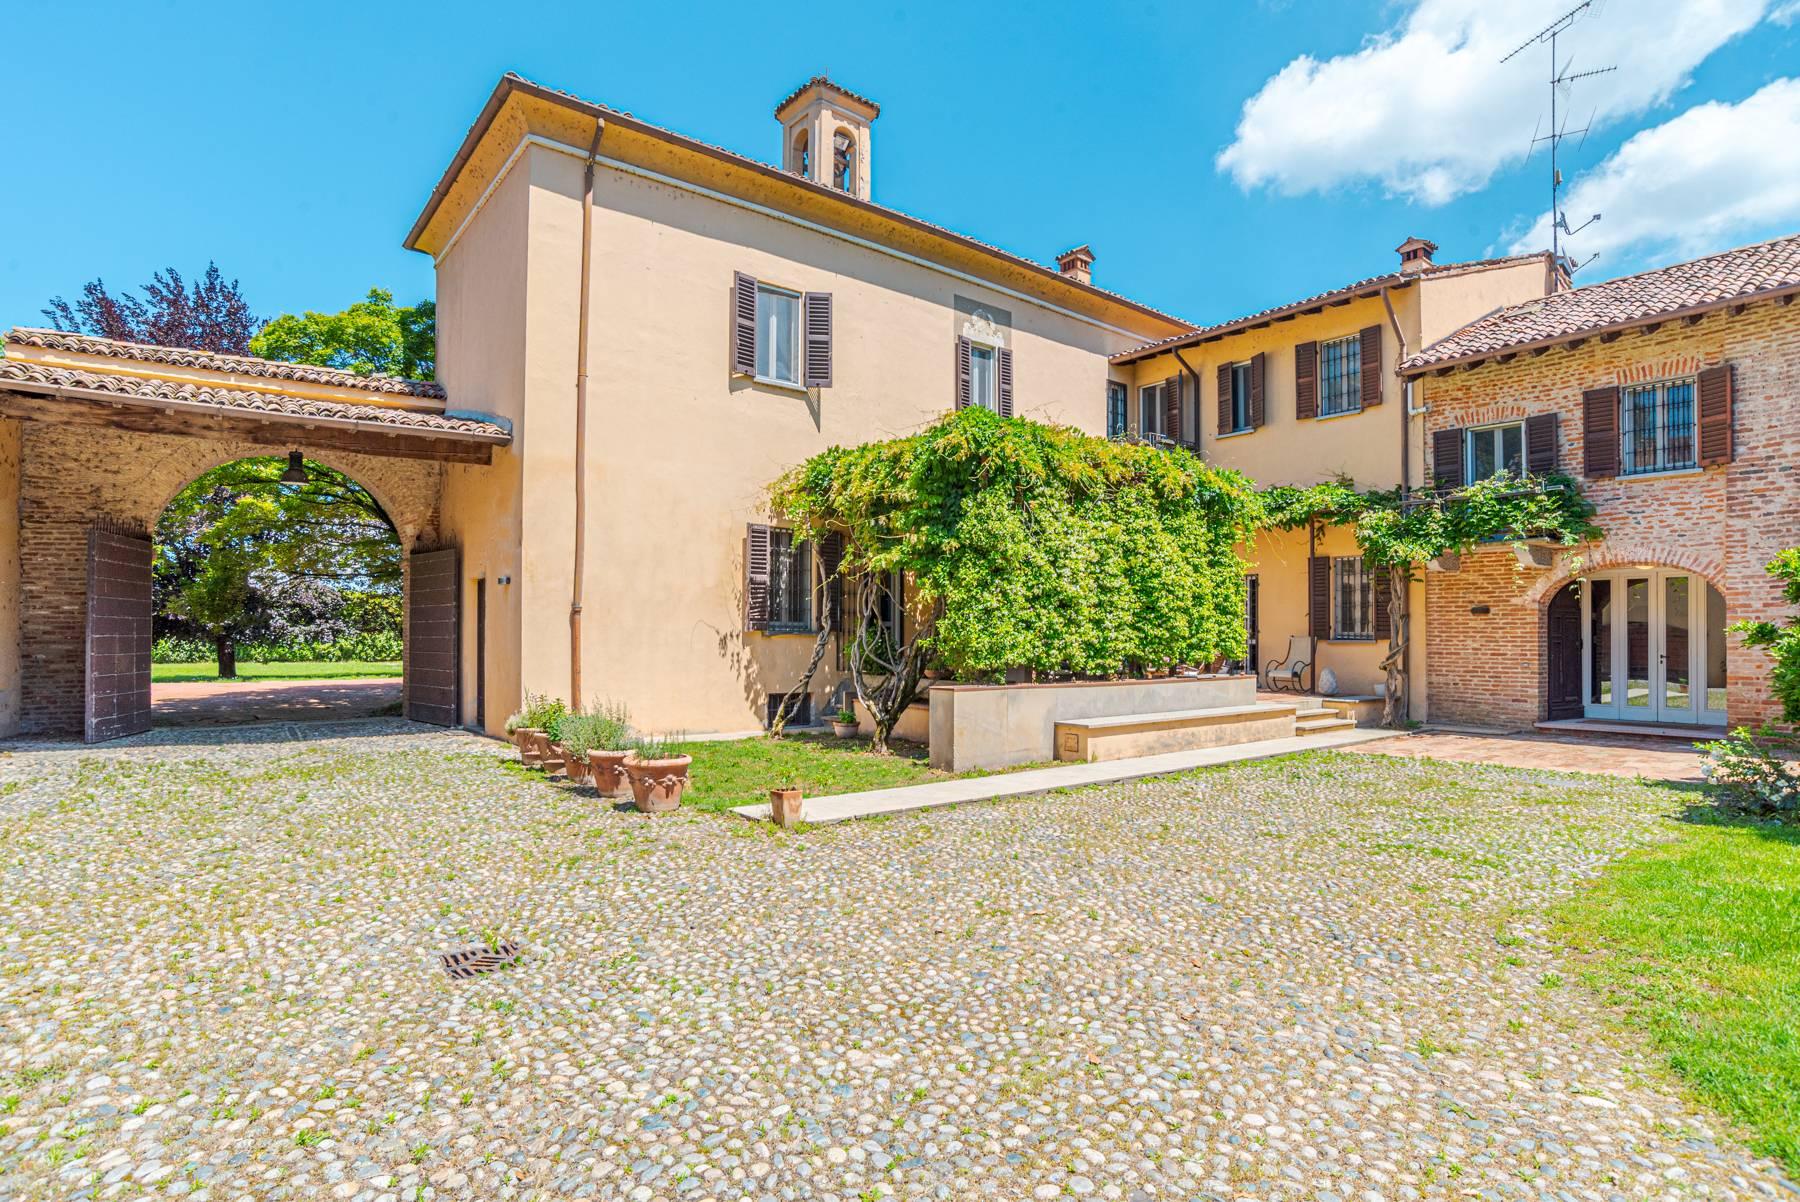 Magnificent property surrounded by greenery in Pavia - 2